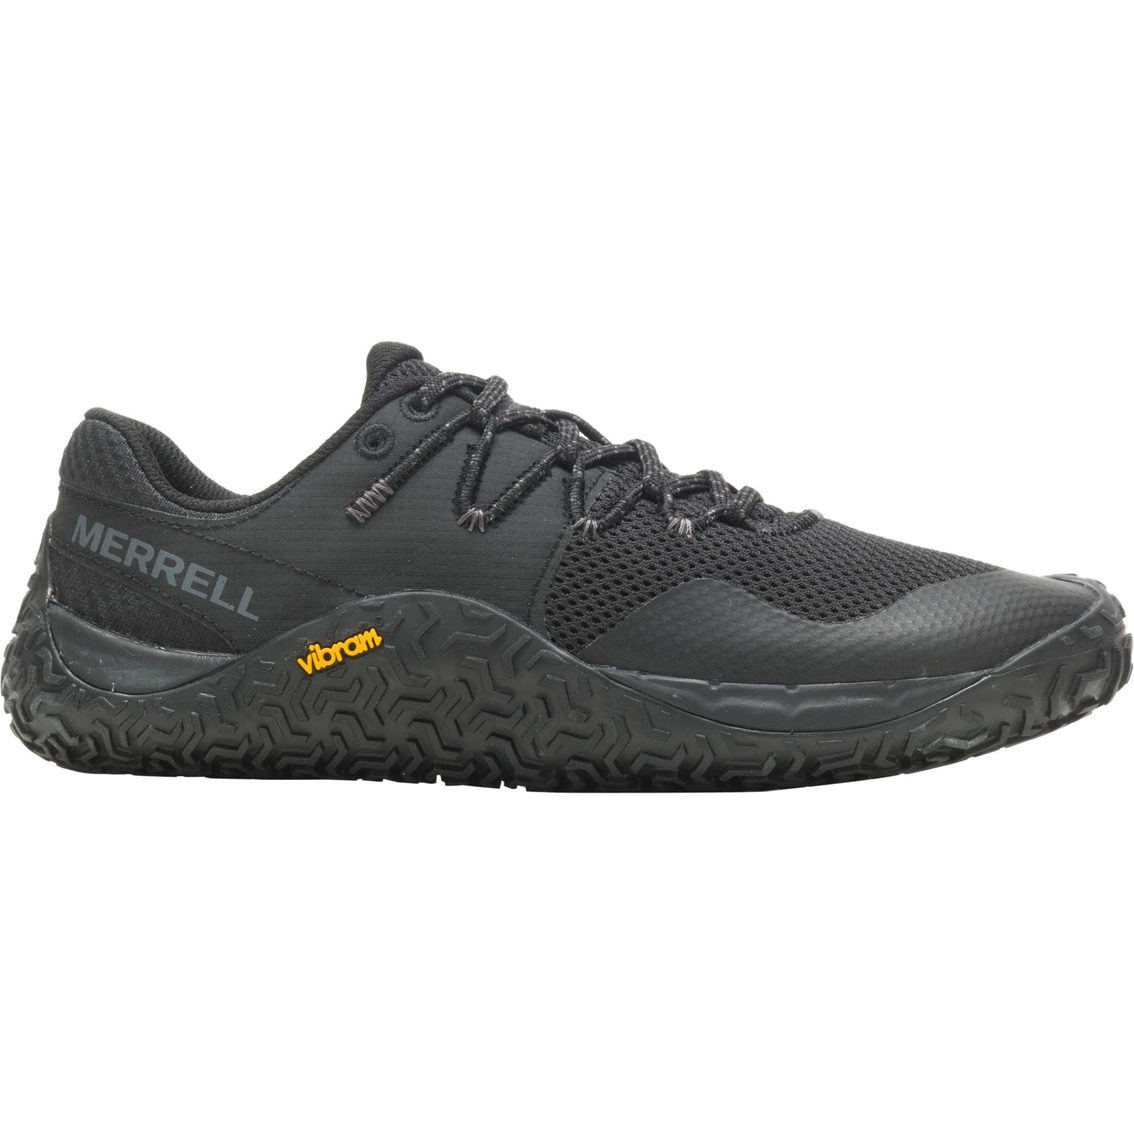 Merrell Women's Trail Glove 7 Running Shoes | Women's Athletic Shoes ...